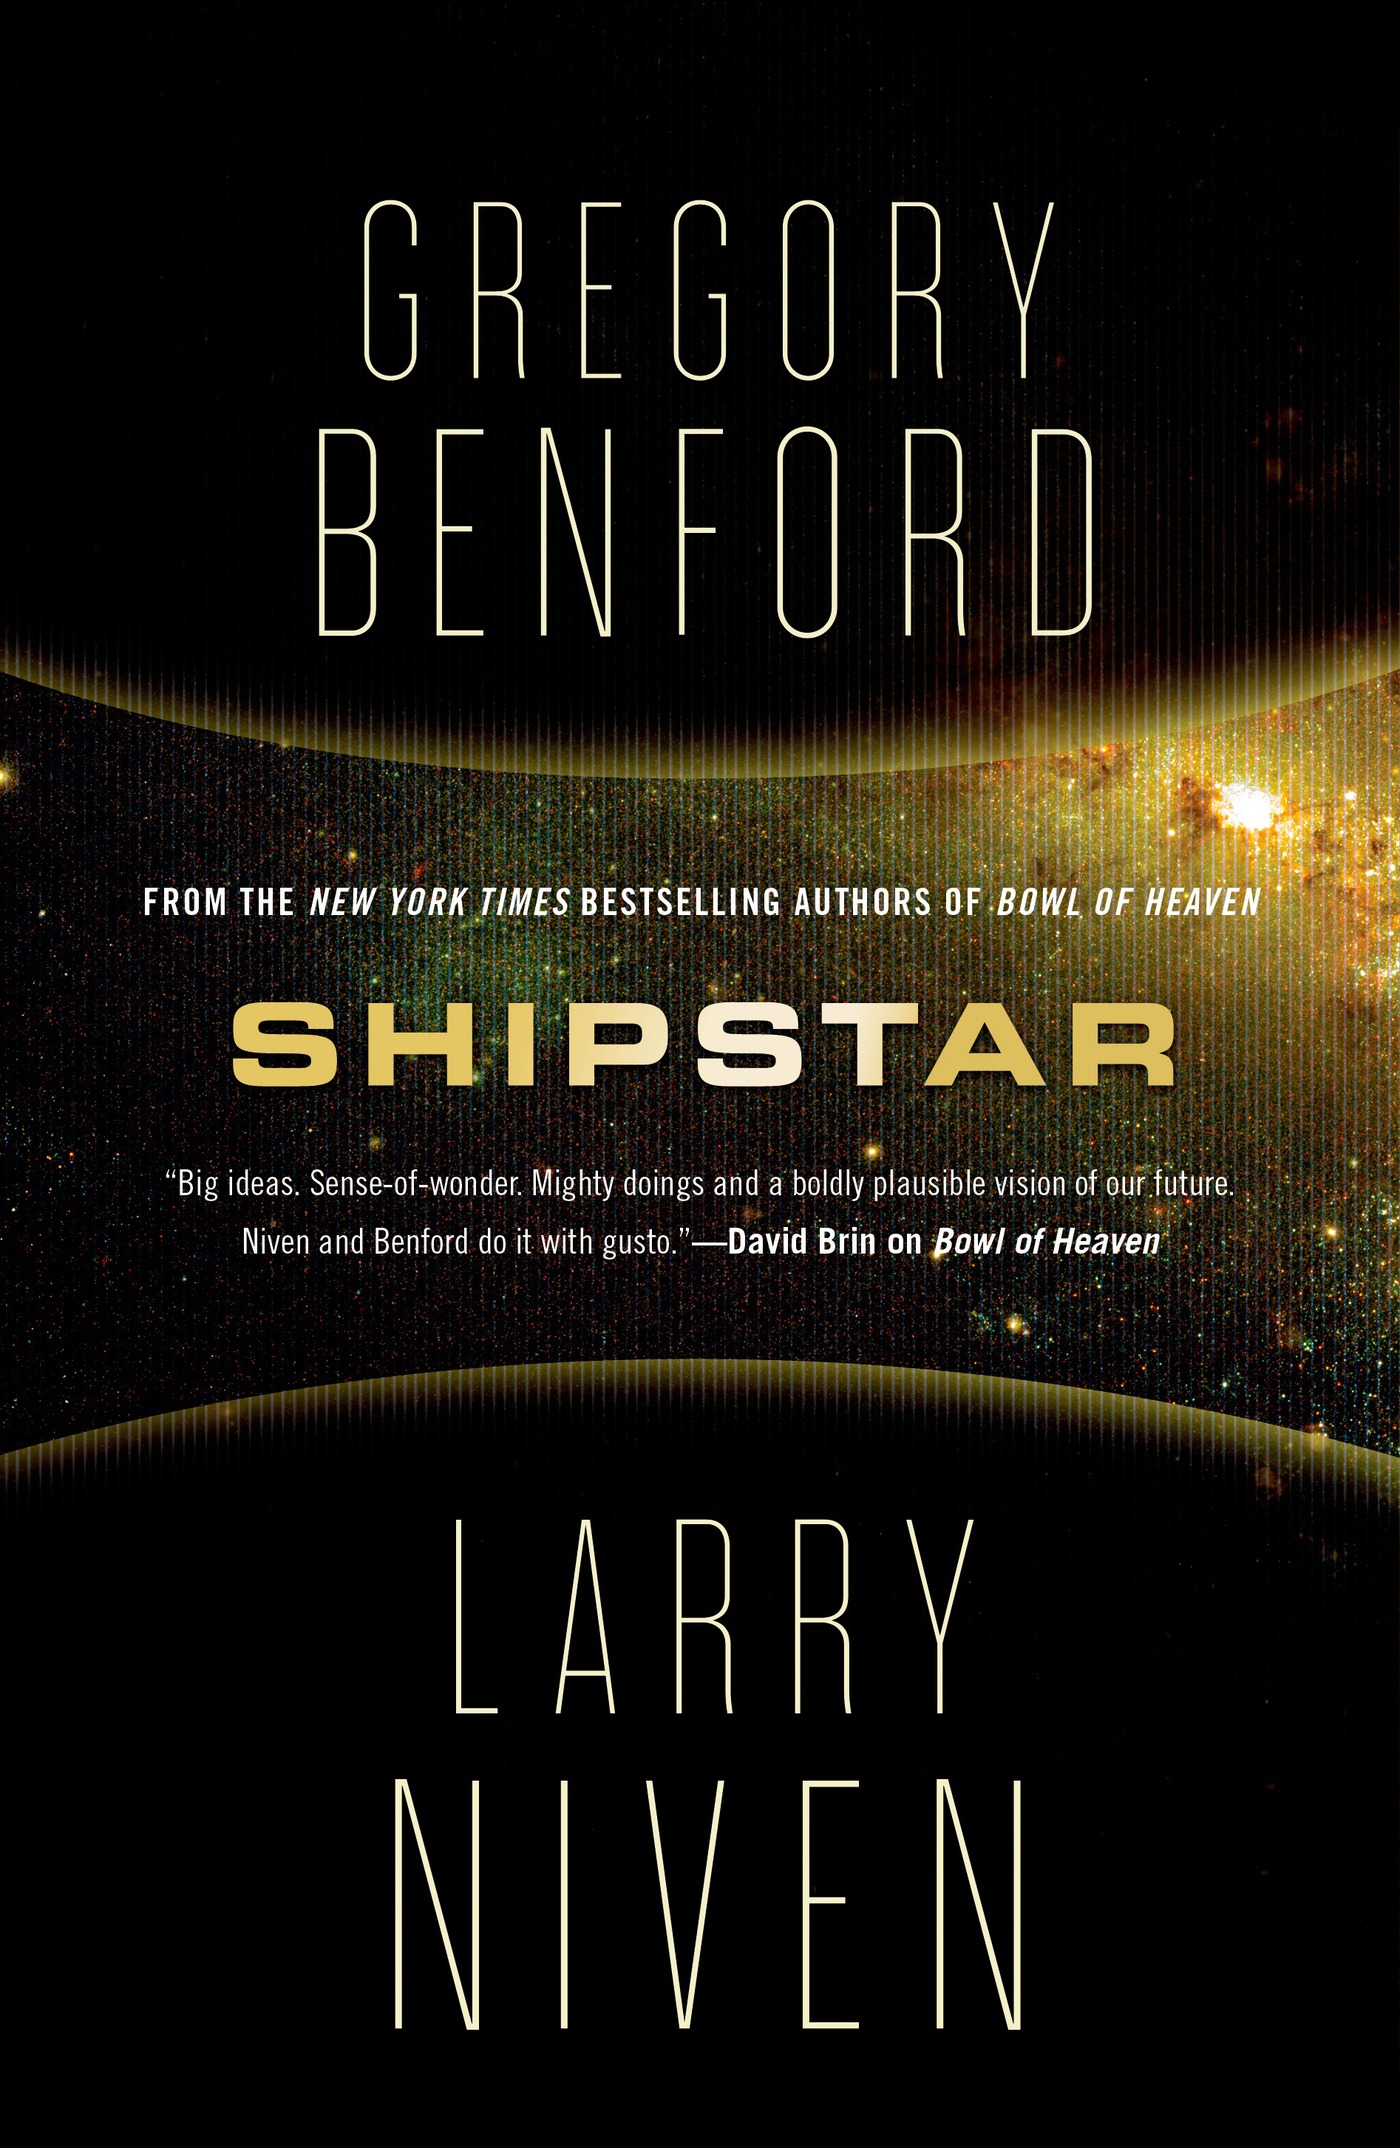 Shipstar : A Science Fiction Novel by Gregory Benford, Larry Niven